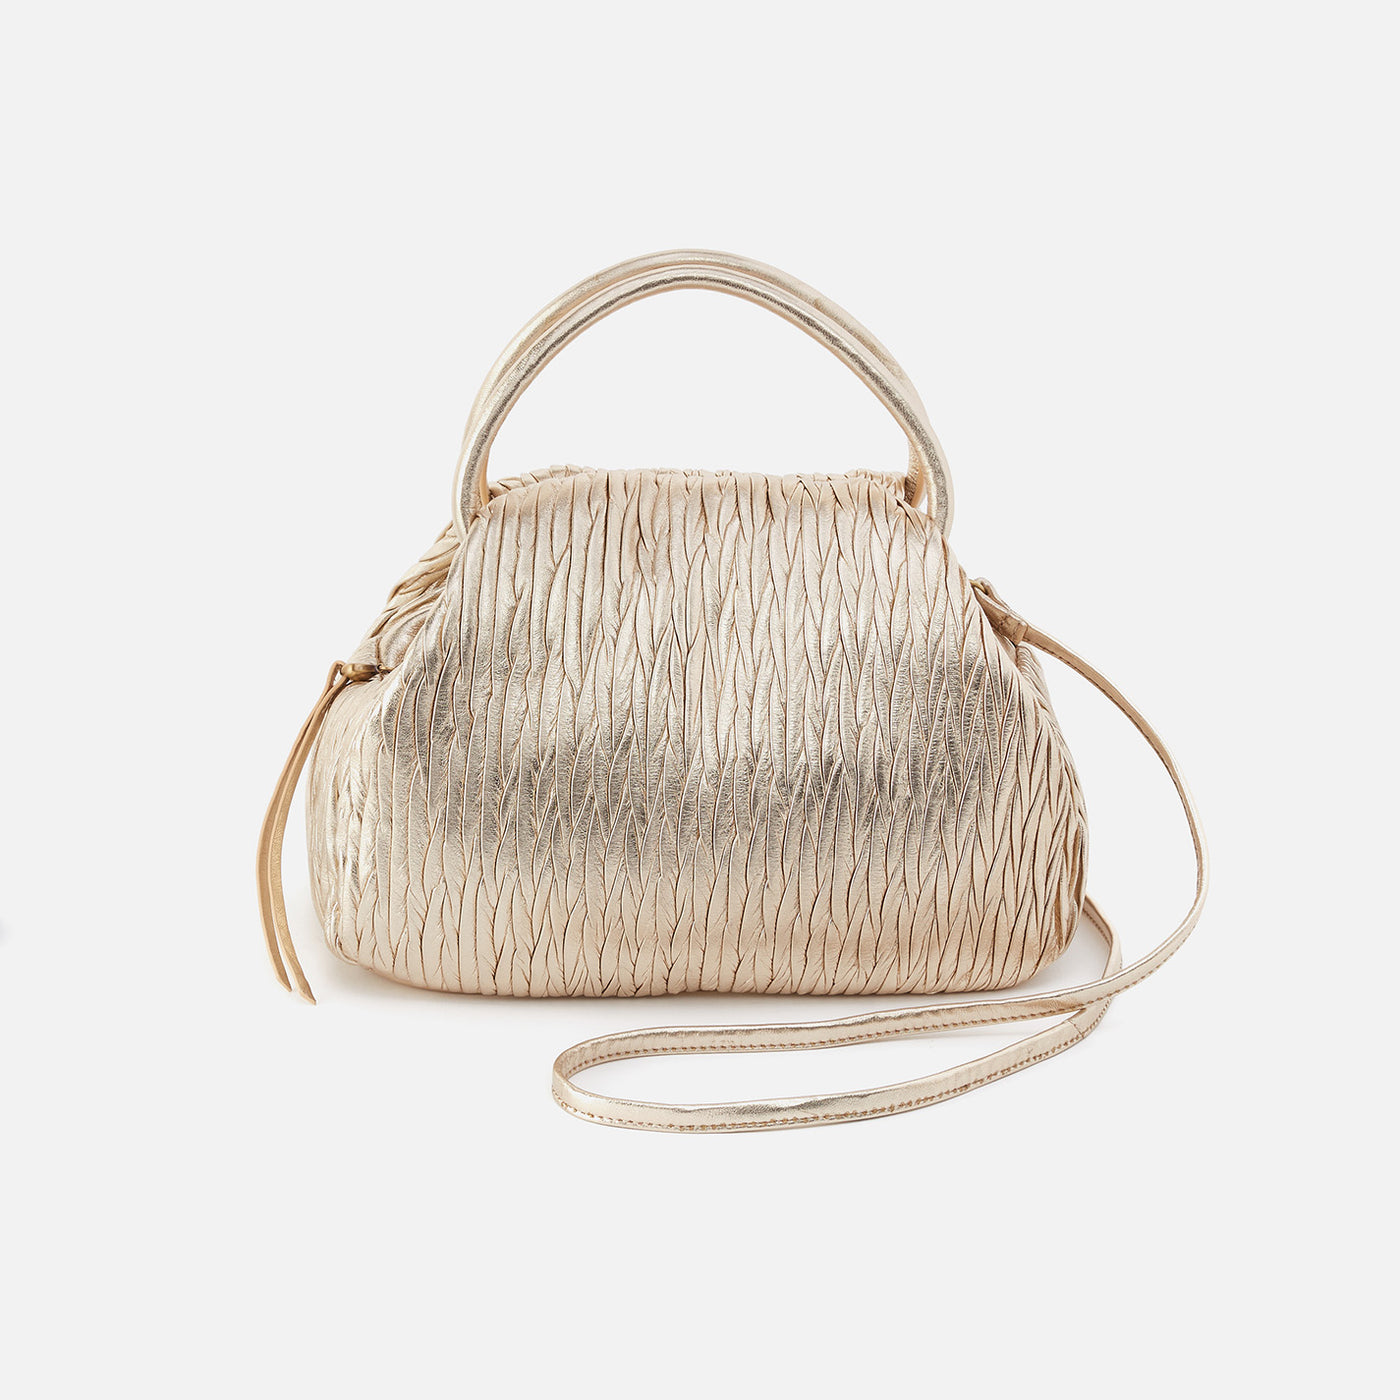 Darling Satchel In Soft Pleated Leather - Gold